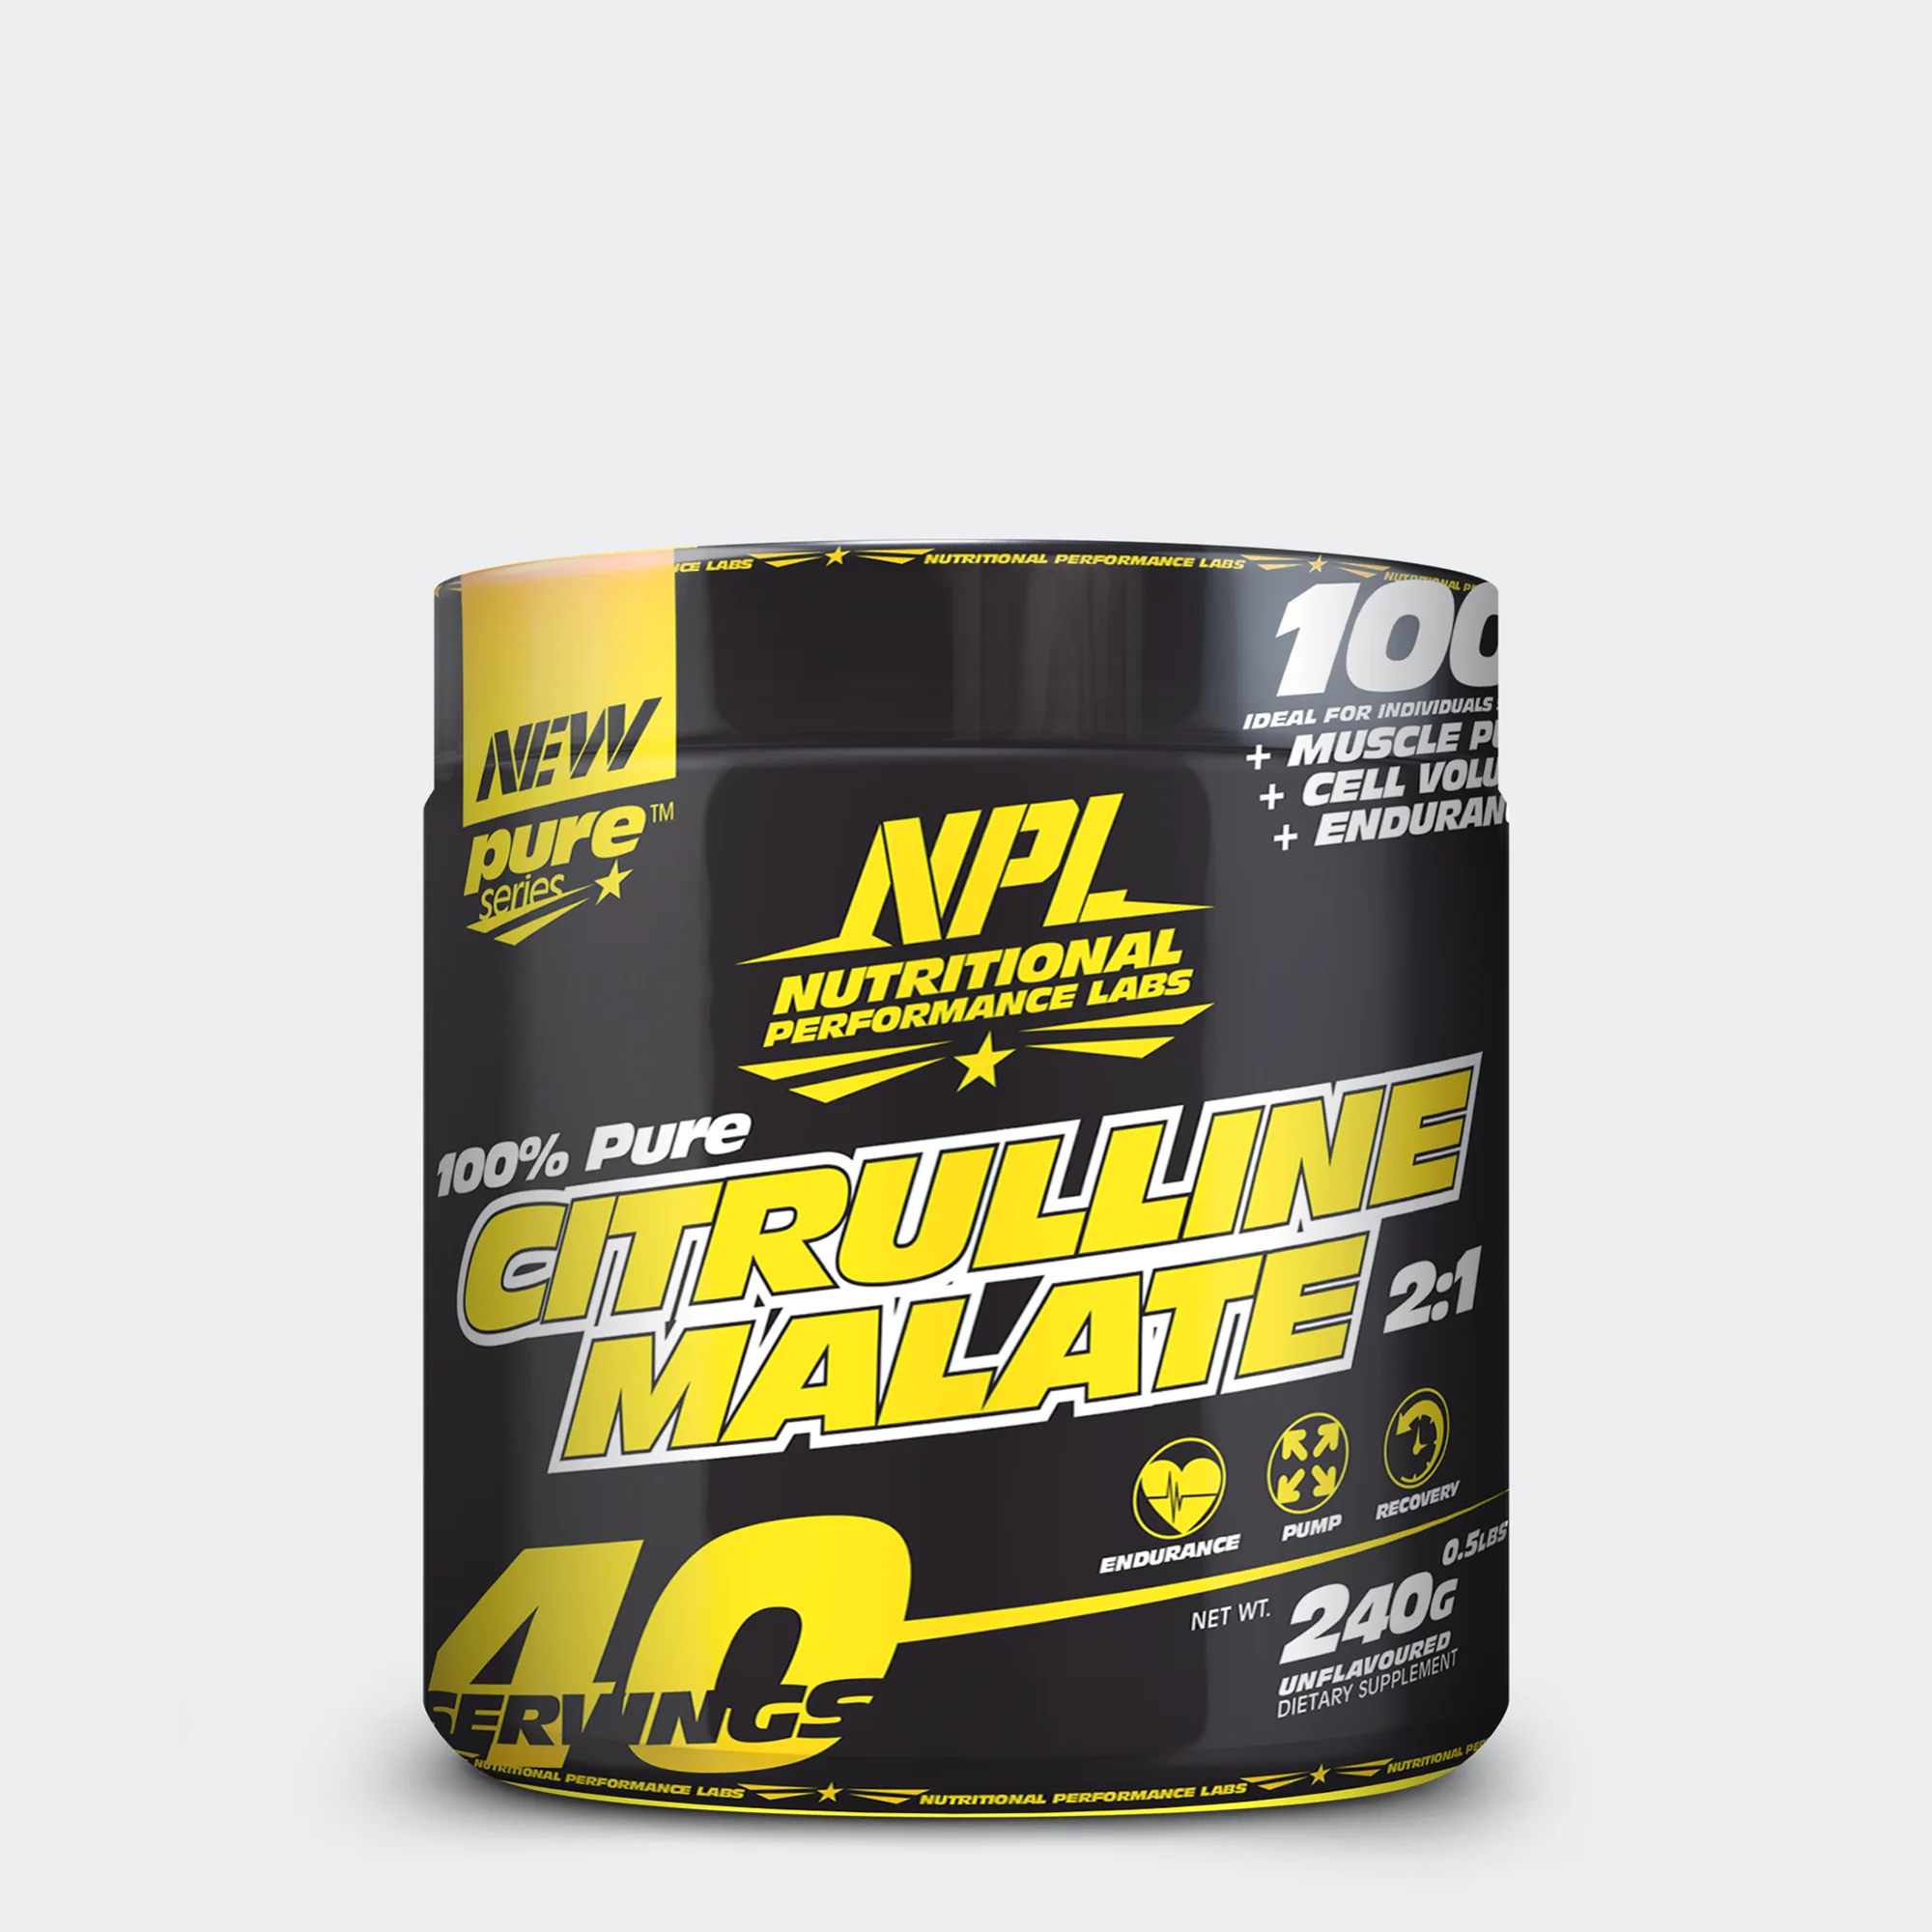 NPL CITRULLINE MALATE: Your Ultimate Pump Enhancer for Peak Performance and Unrivaled Muscle Pumps.